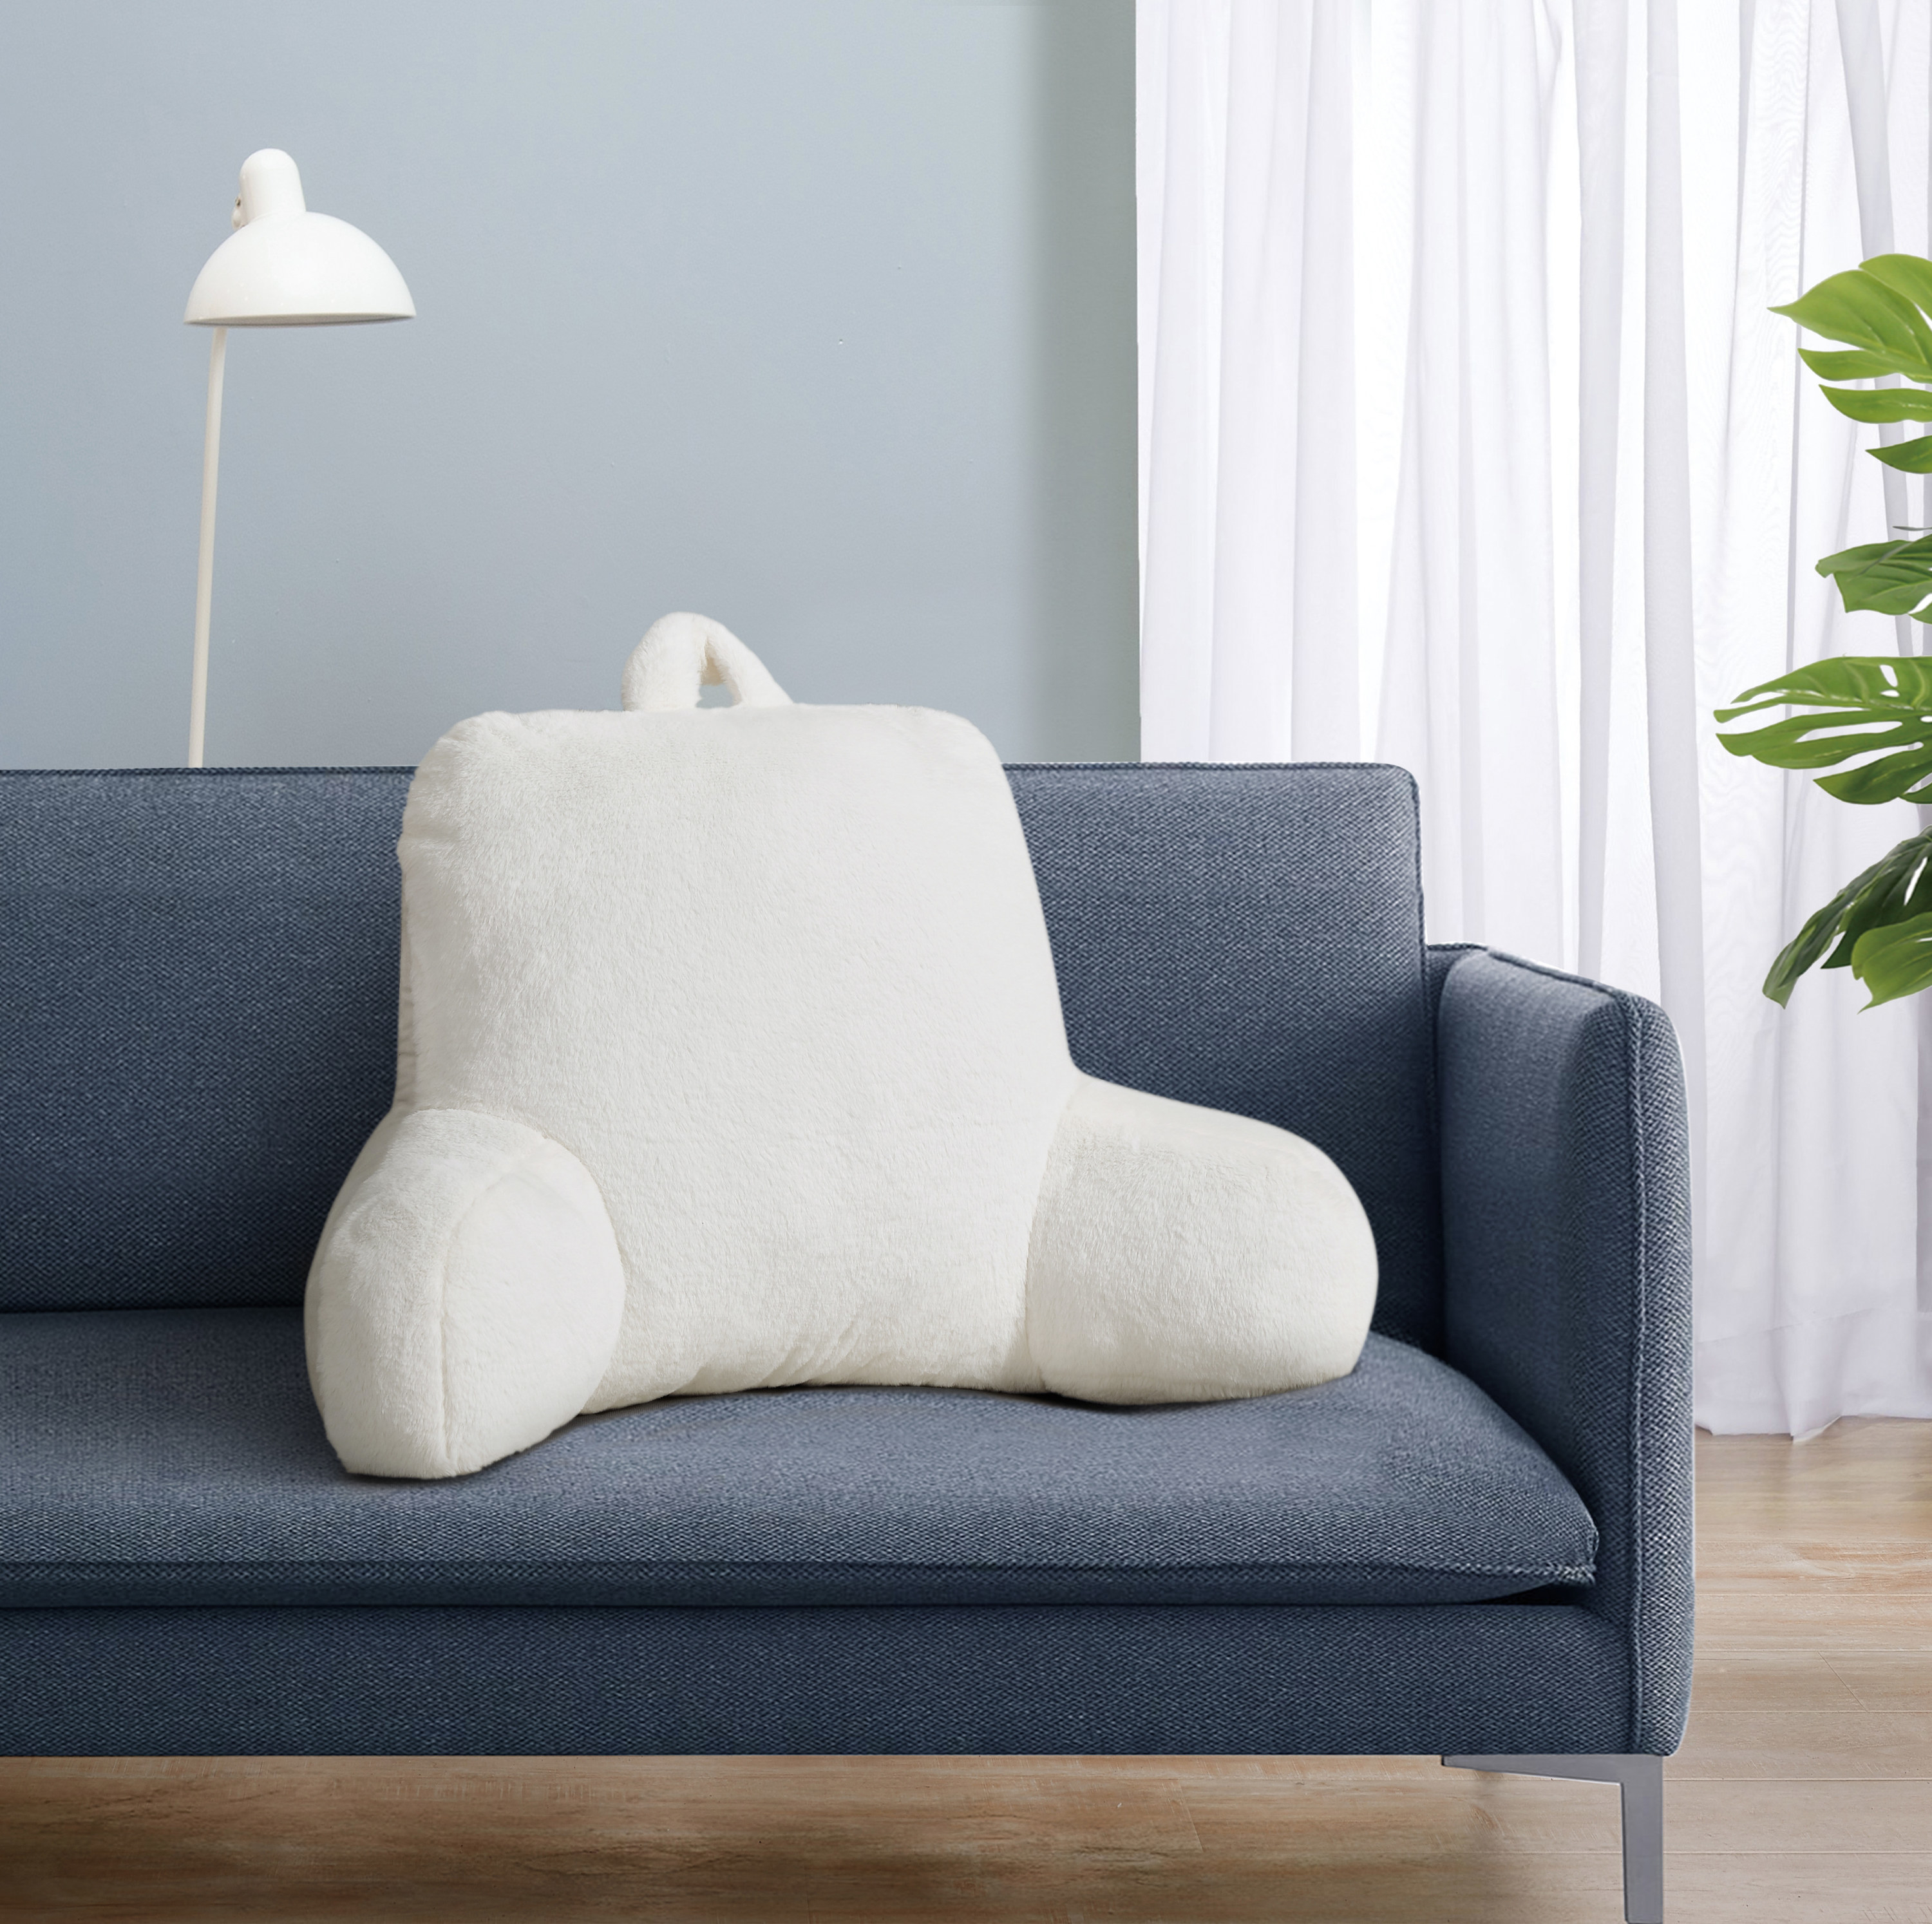 The back pillow in white on a navy couch